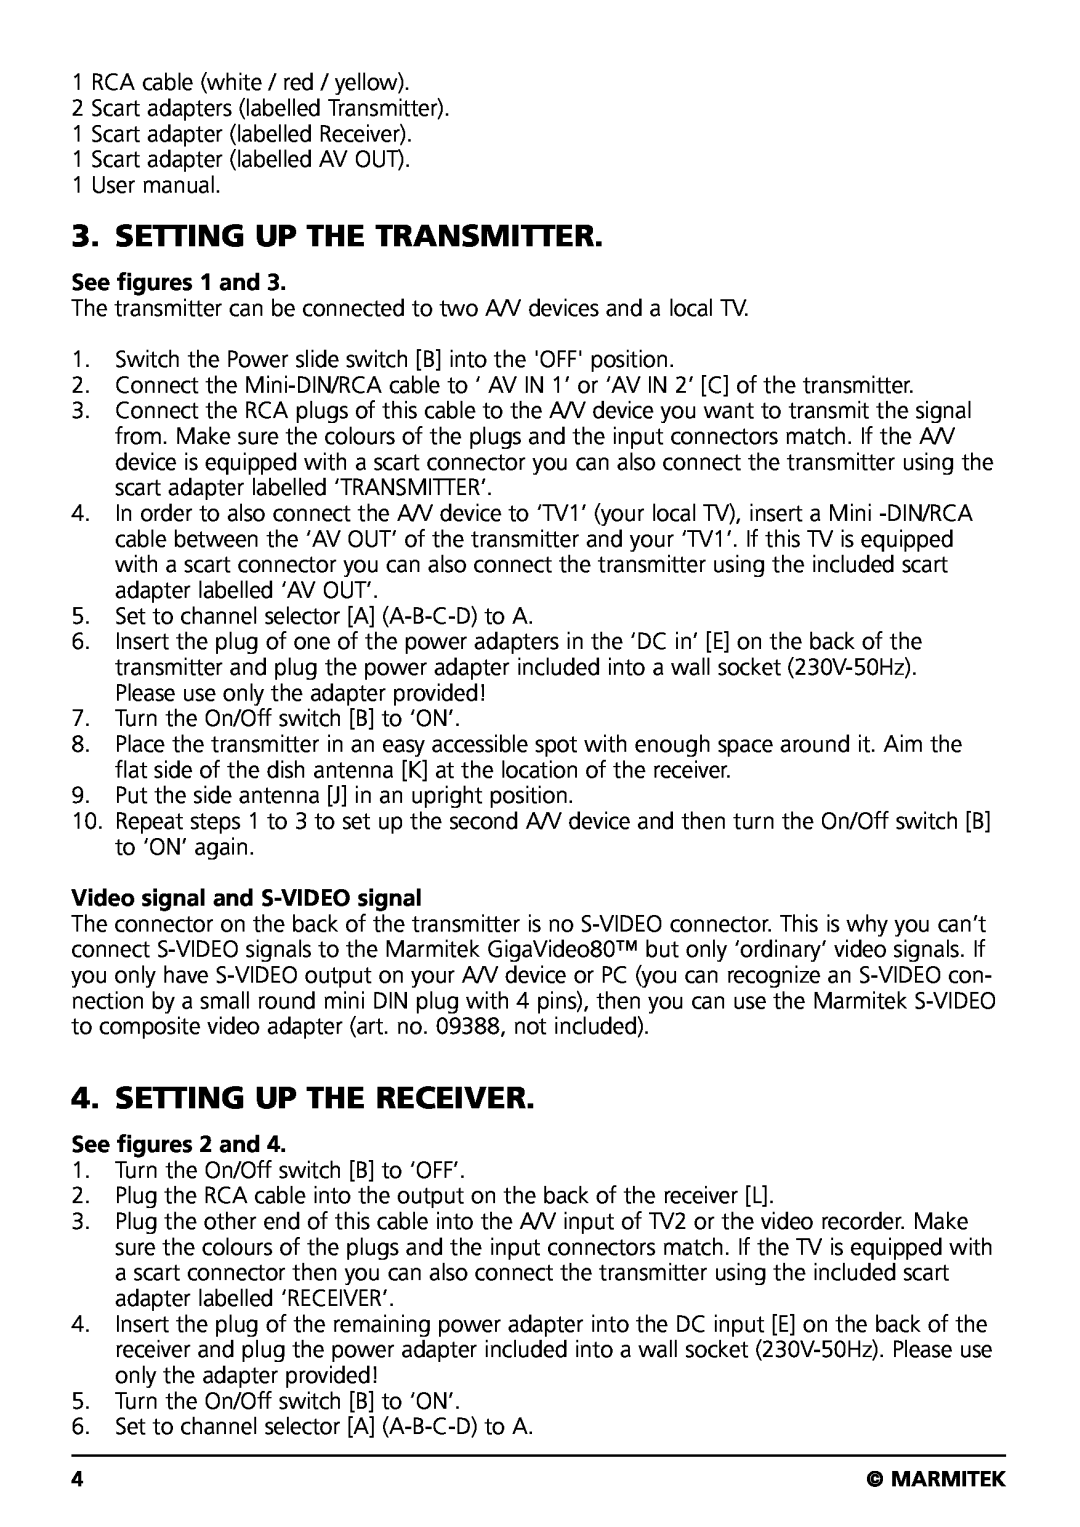 Marmitek GIGAVIDEO80 user manual Setting Up The Transmitter, Setting Up The Receiver, See figures 1 and, See figures 2 and 